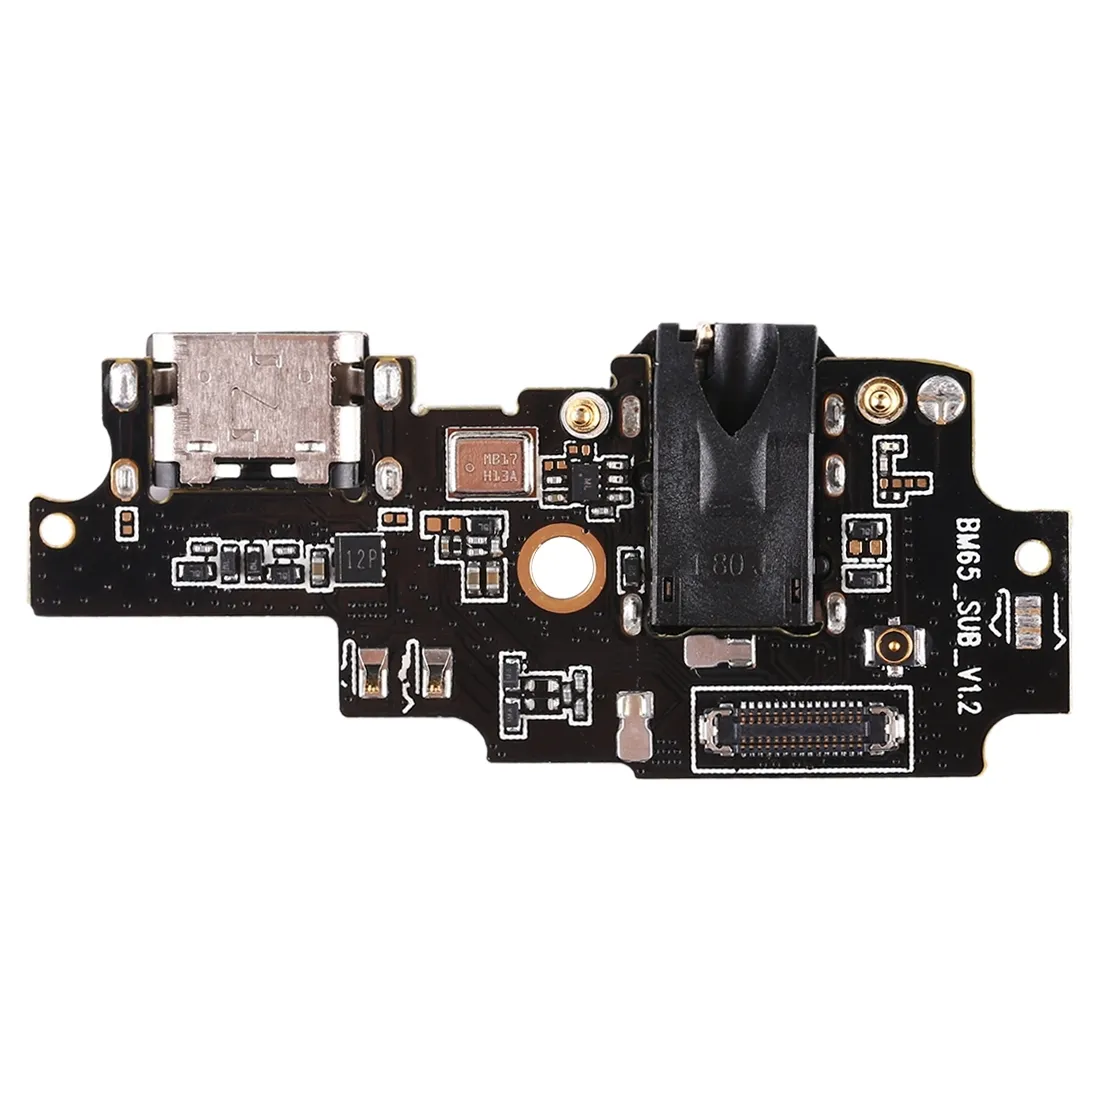 USB Charging Charger Dock Port Connector Headphone Jack Flex Cable For Armor 8 x8 7T Charging Port Board for Ulefone Armor 9 9E